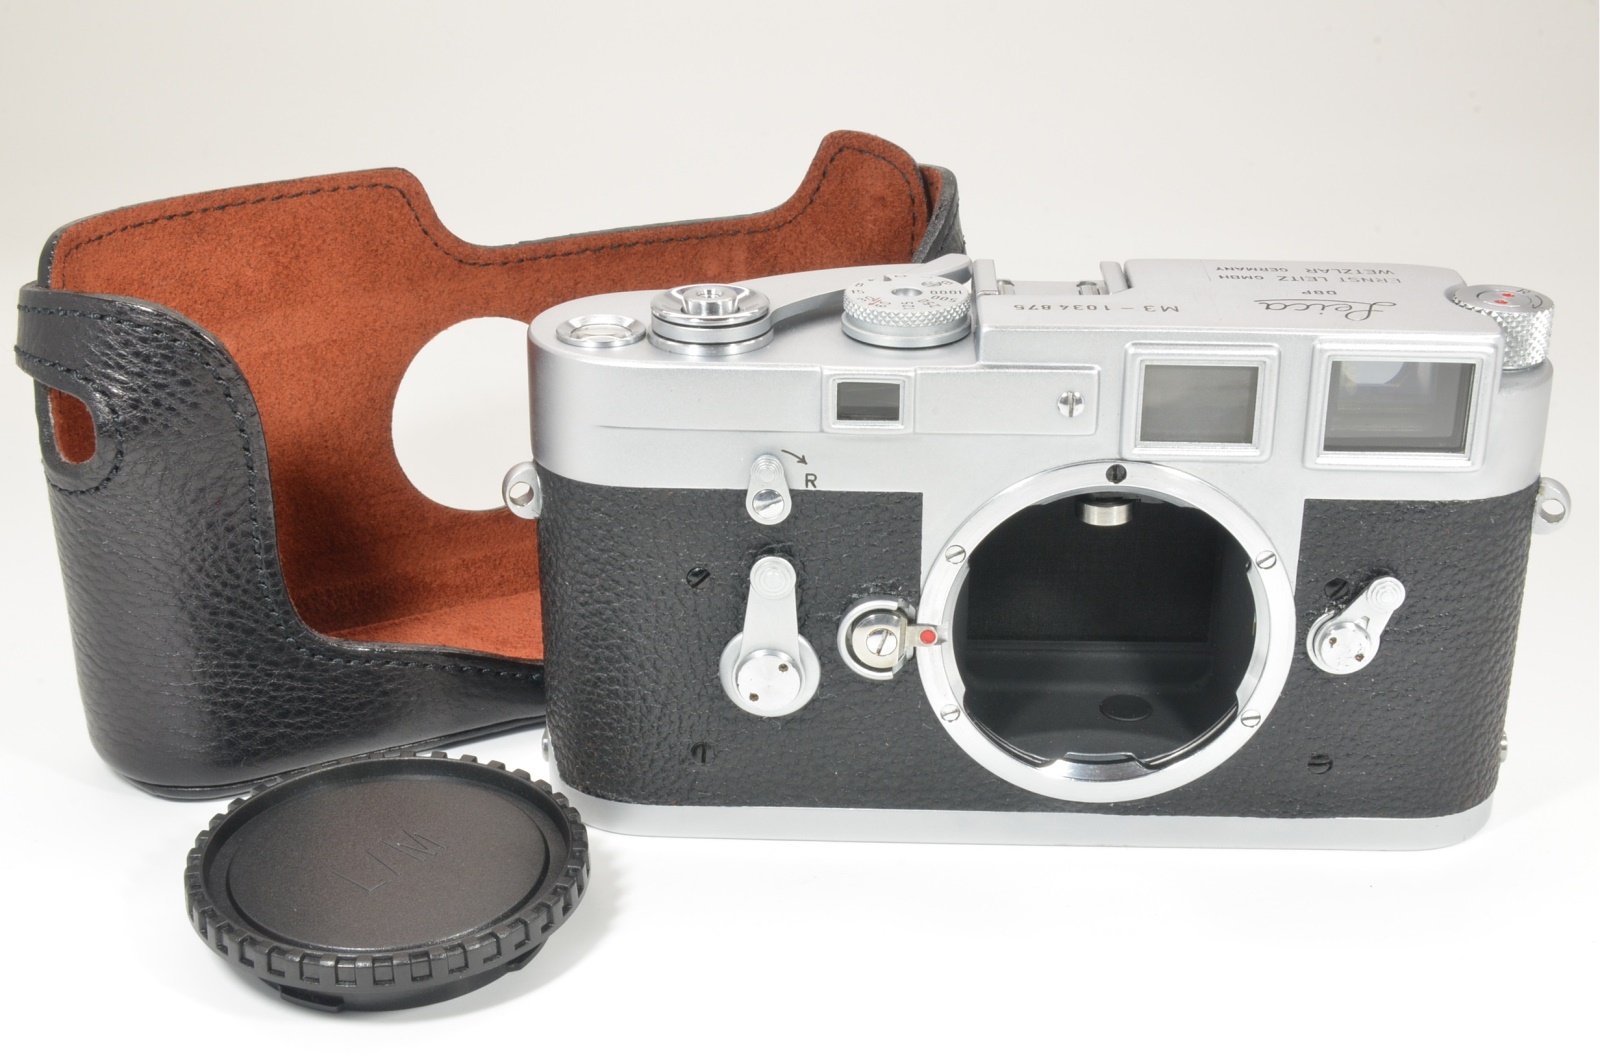 leica m3 single stroke s/n 1034875 year 1961 with leather case, shooting tested